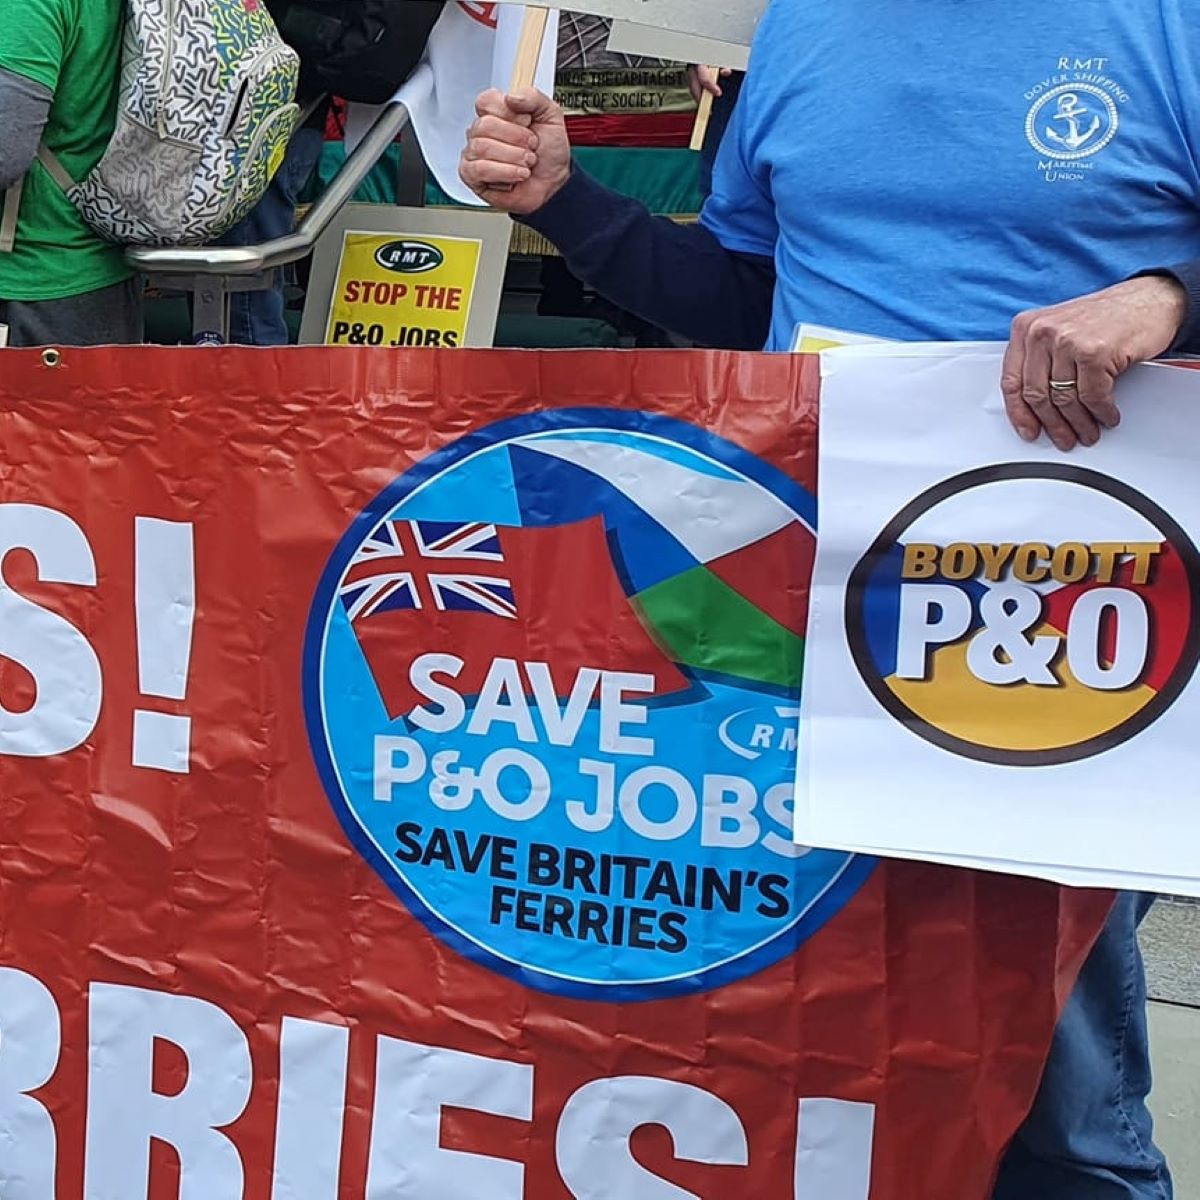 Protesters demonstrating against P&O in Southampton tomorrow